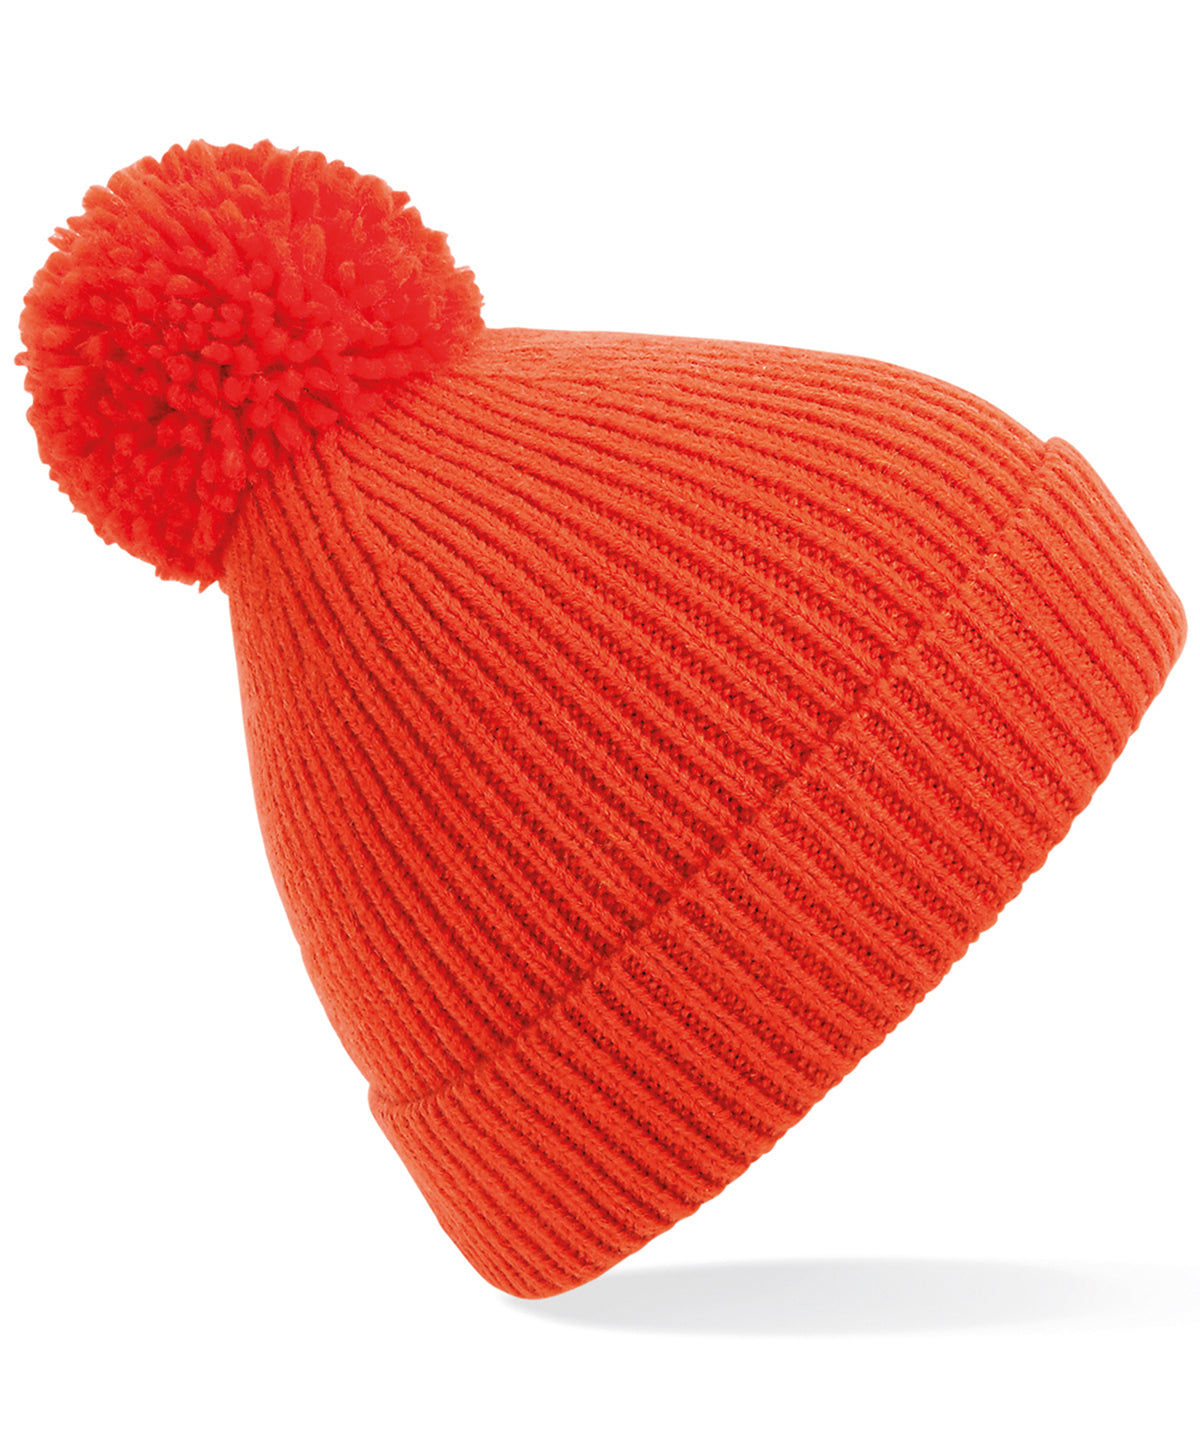 Personalised Hats - Mid Red Beechfield Engineered knit ribbed pom pom beanie